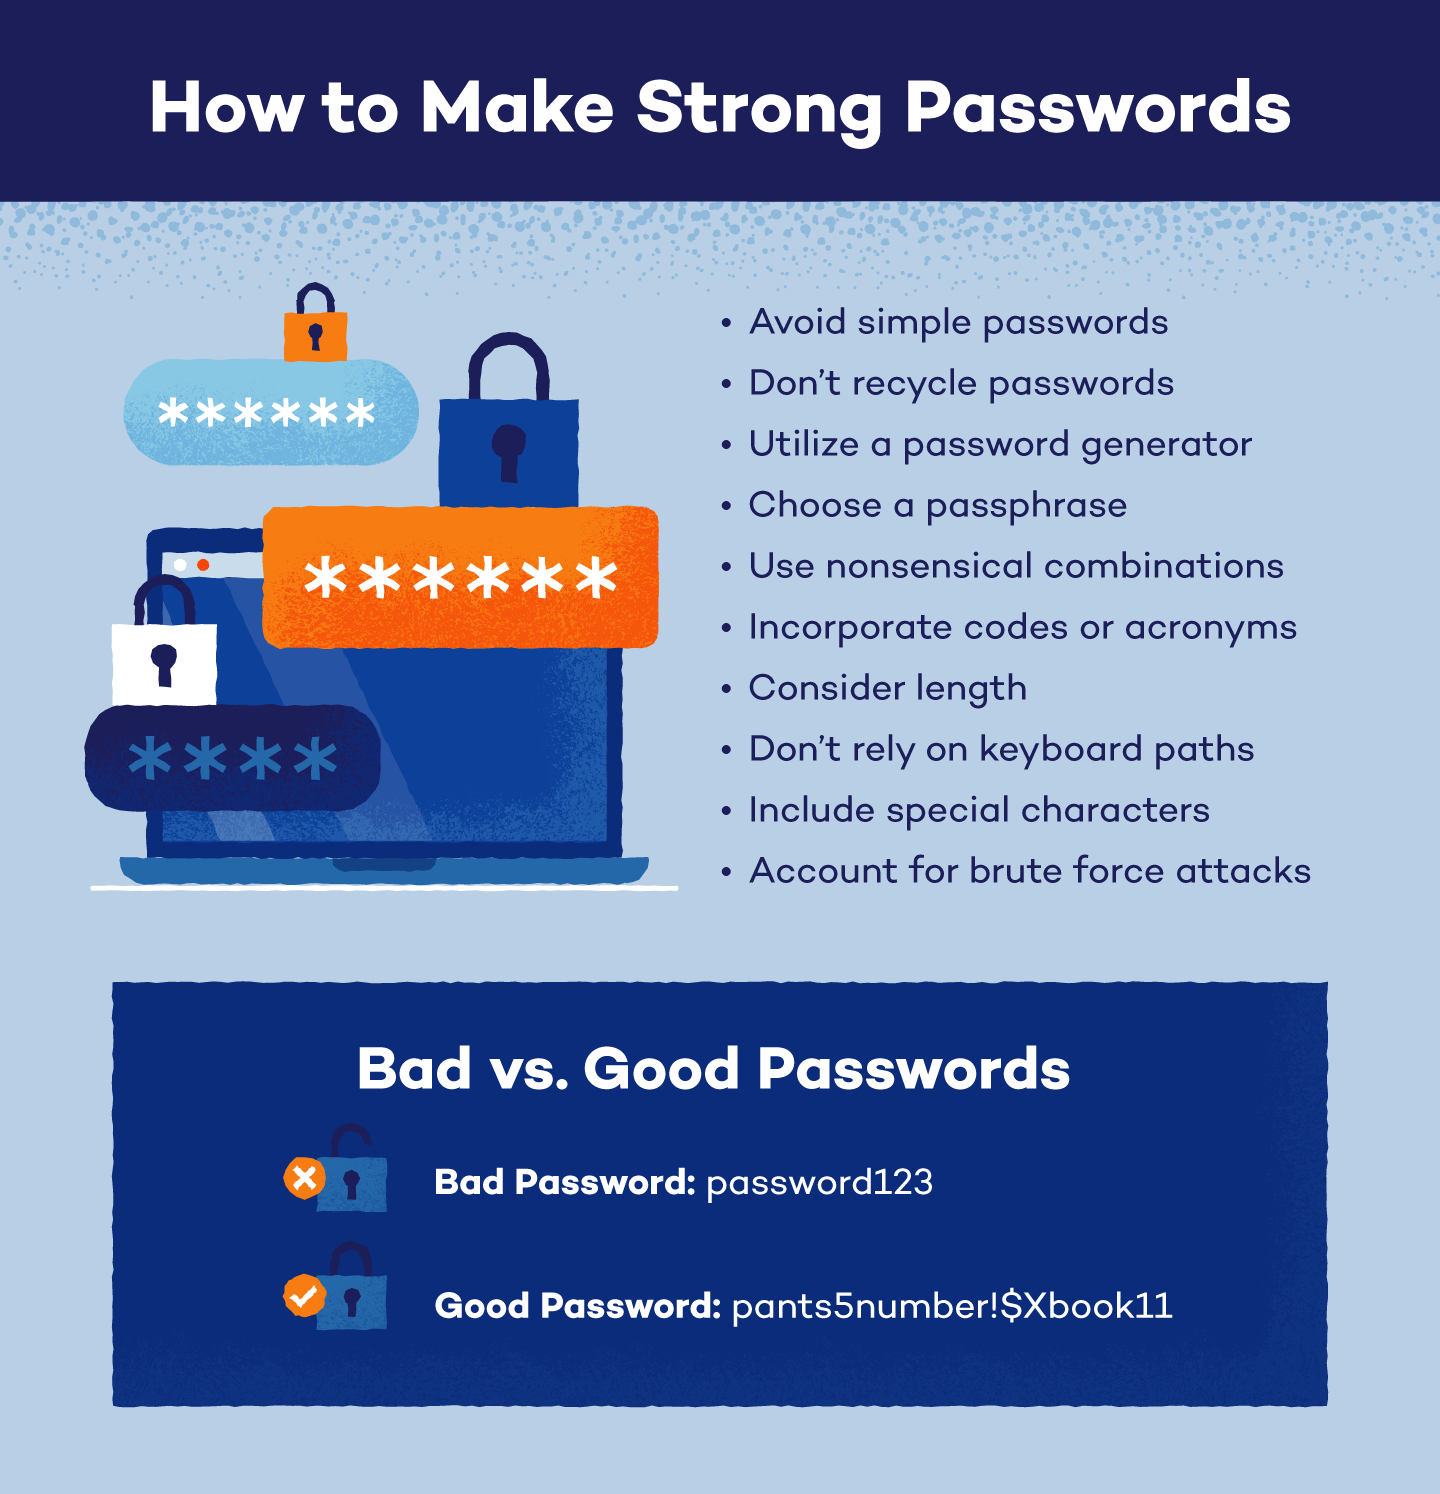 Change your computer's login password and any other passwords associated with your accounts
Make sure to use strong, unique passwords that are difficult to guess or crack